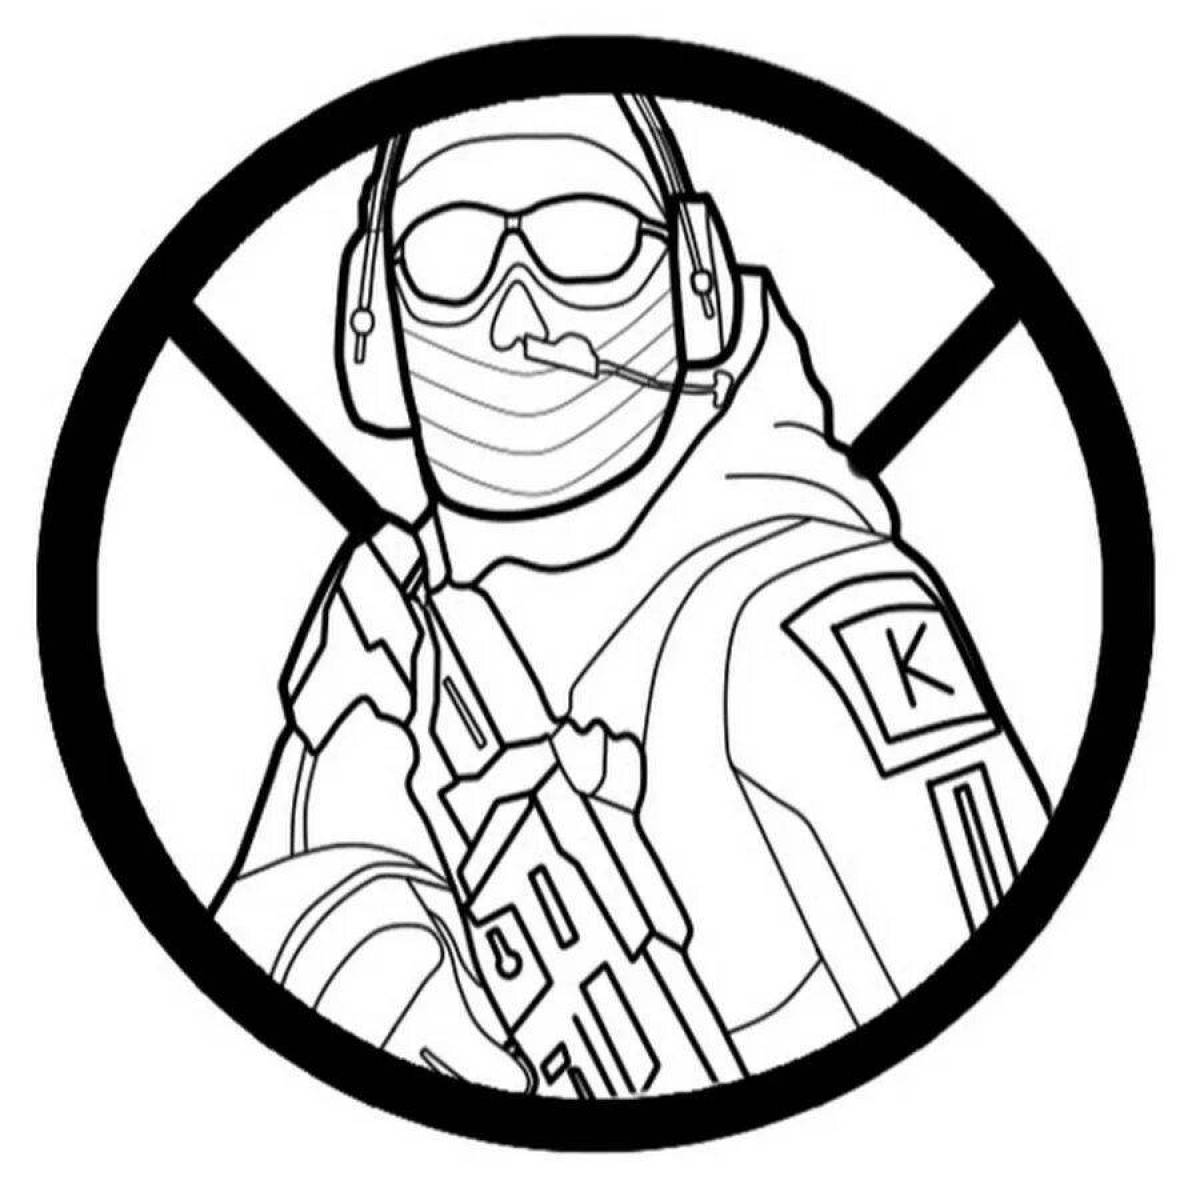 Entertaining coloring of standoff 2 stickers